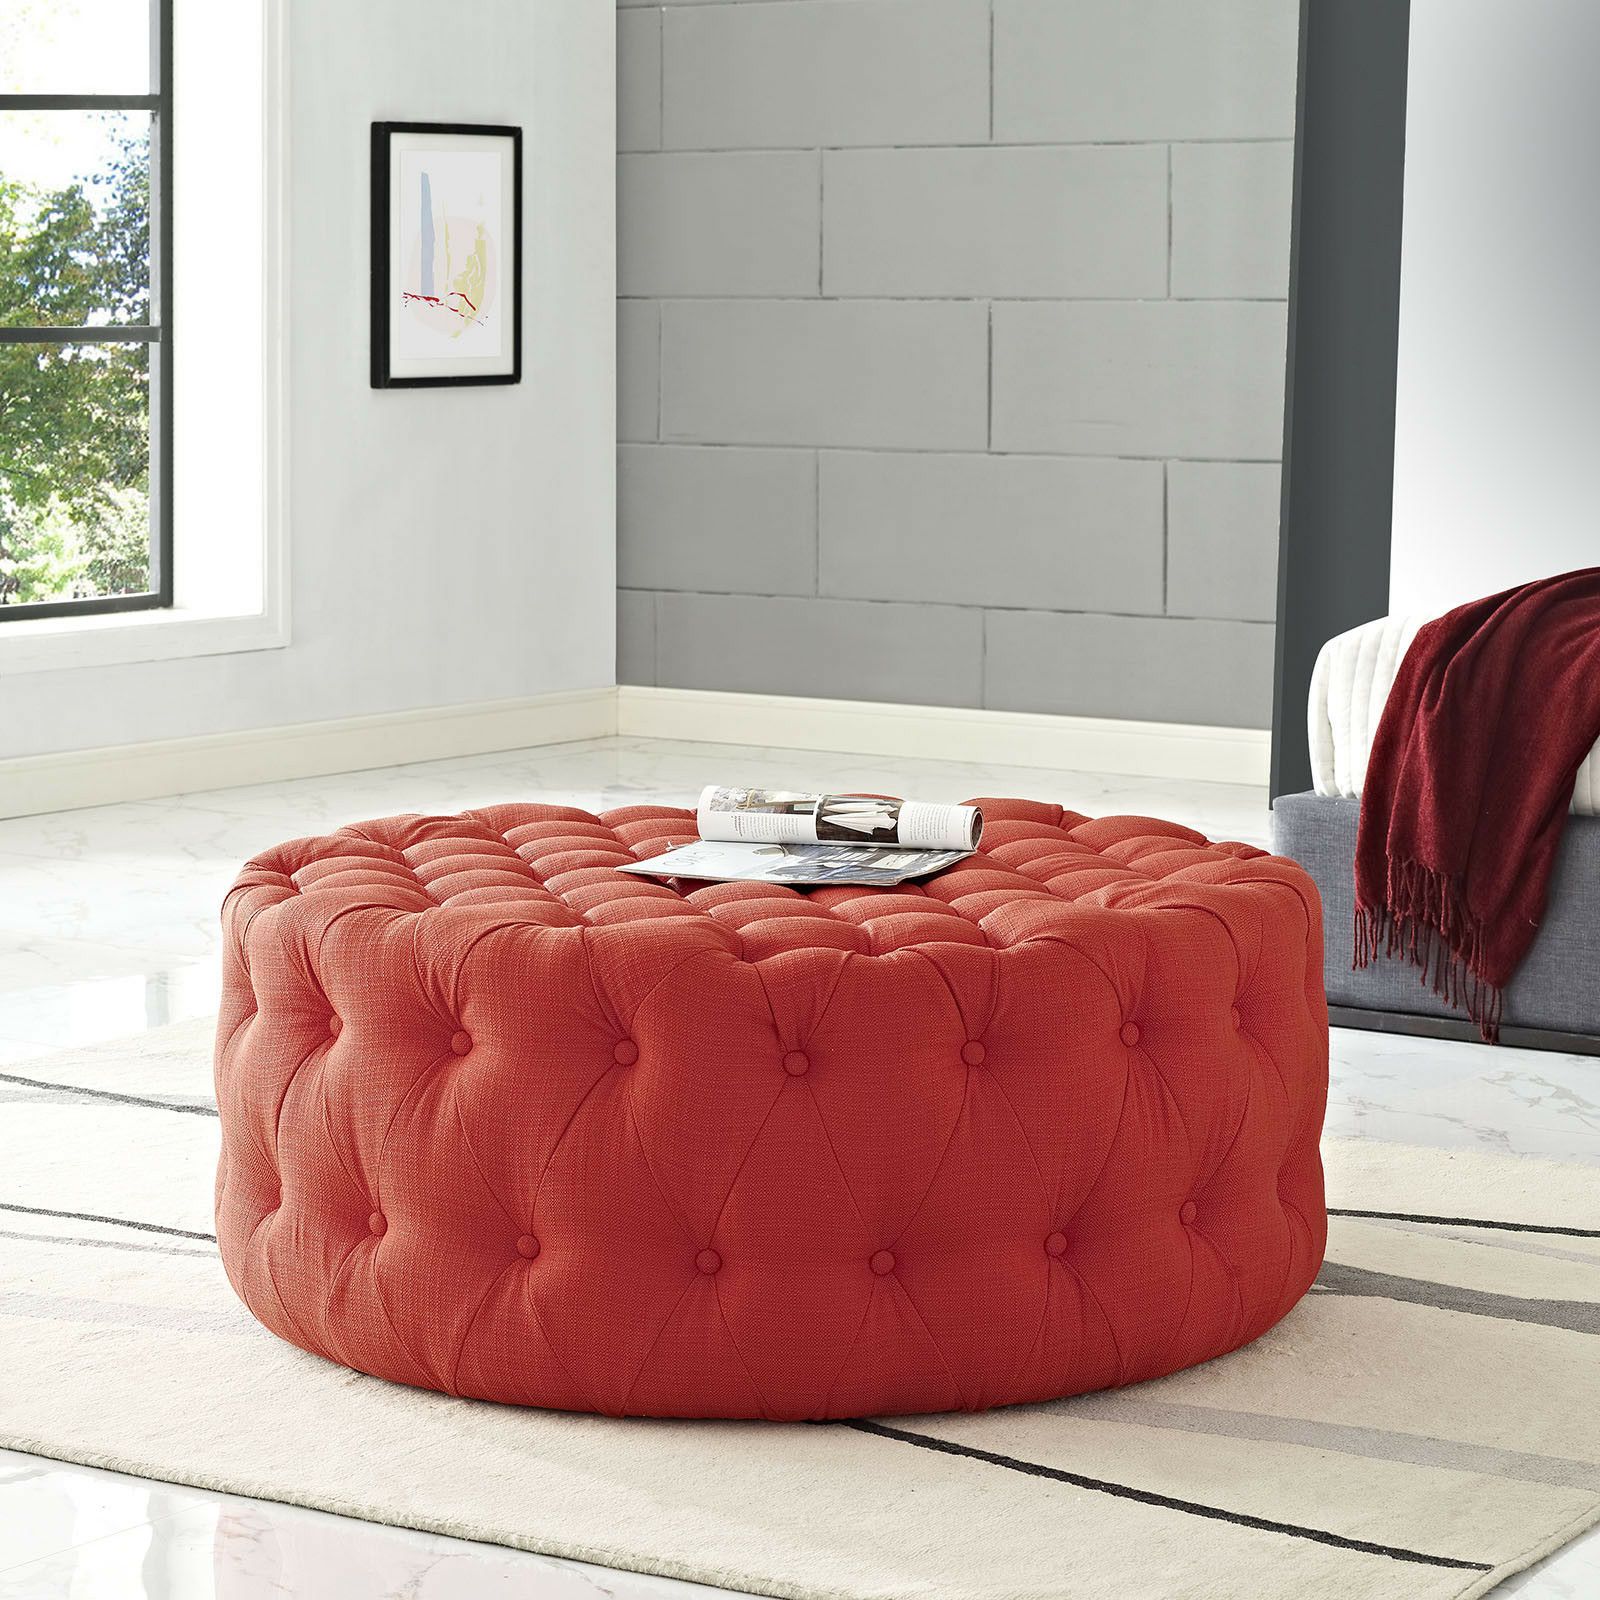 Fabric Oversized Pouf Ottomans In Widely Used Button Tufted Fabric Upholstered Round Ottoman In Atomic Red (View 4 of 10)